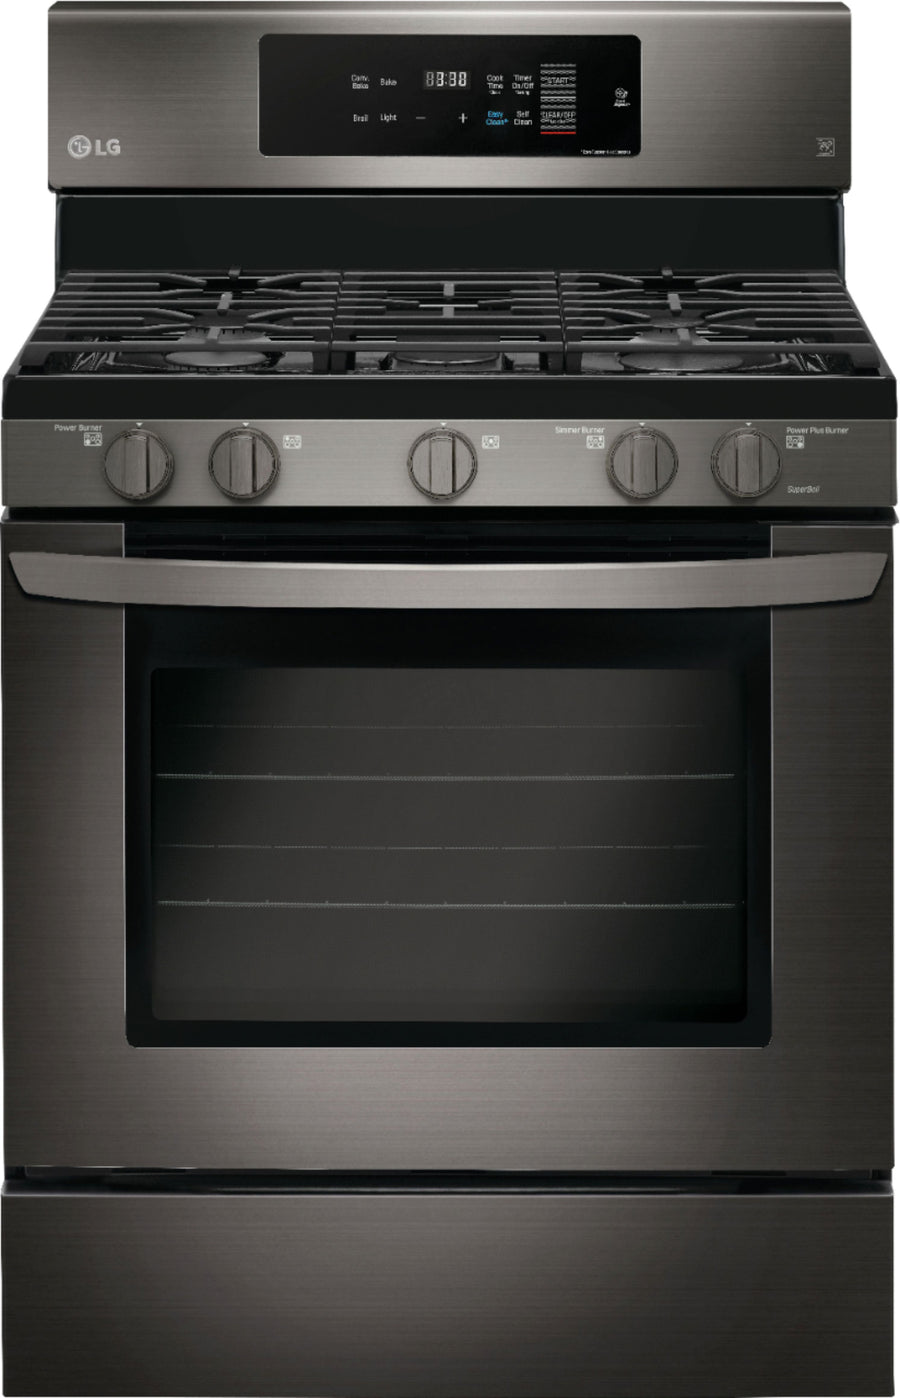 LG - 5.4 Cu. Ft. Self-Cleaning Freestanding Gas Convection Range with EasyClean - Black stainless steel_0